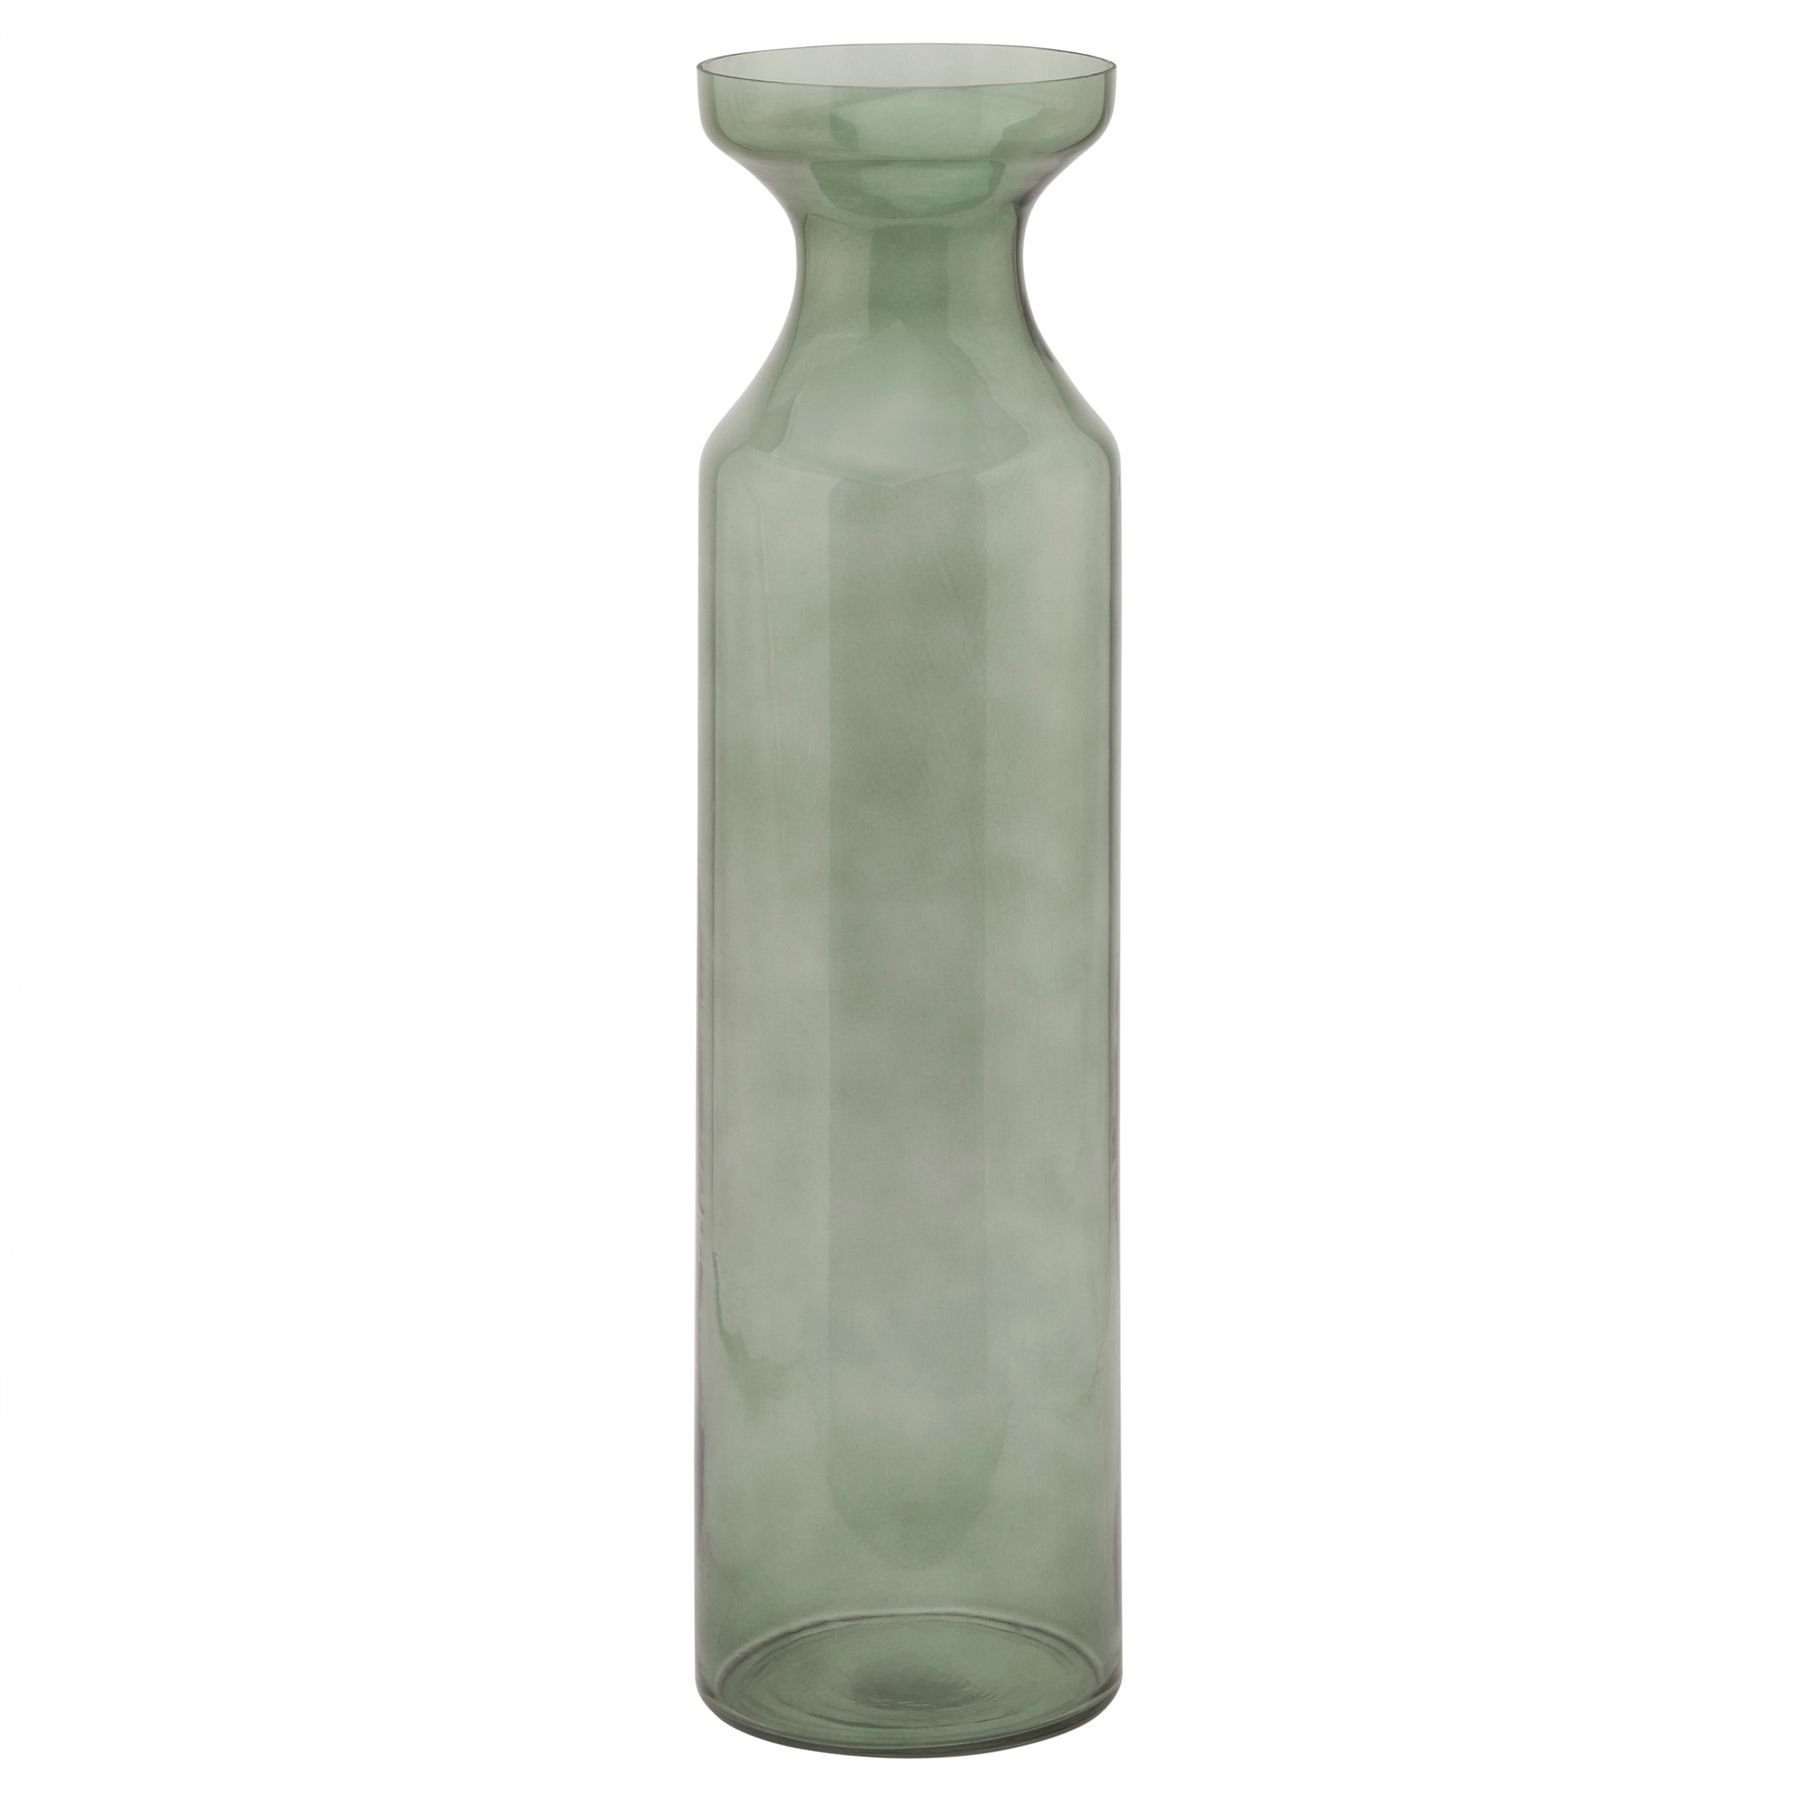 Smoked Sage Glass Tall Fluted Vase - Image 1